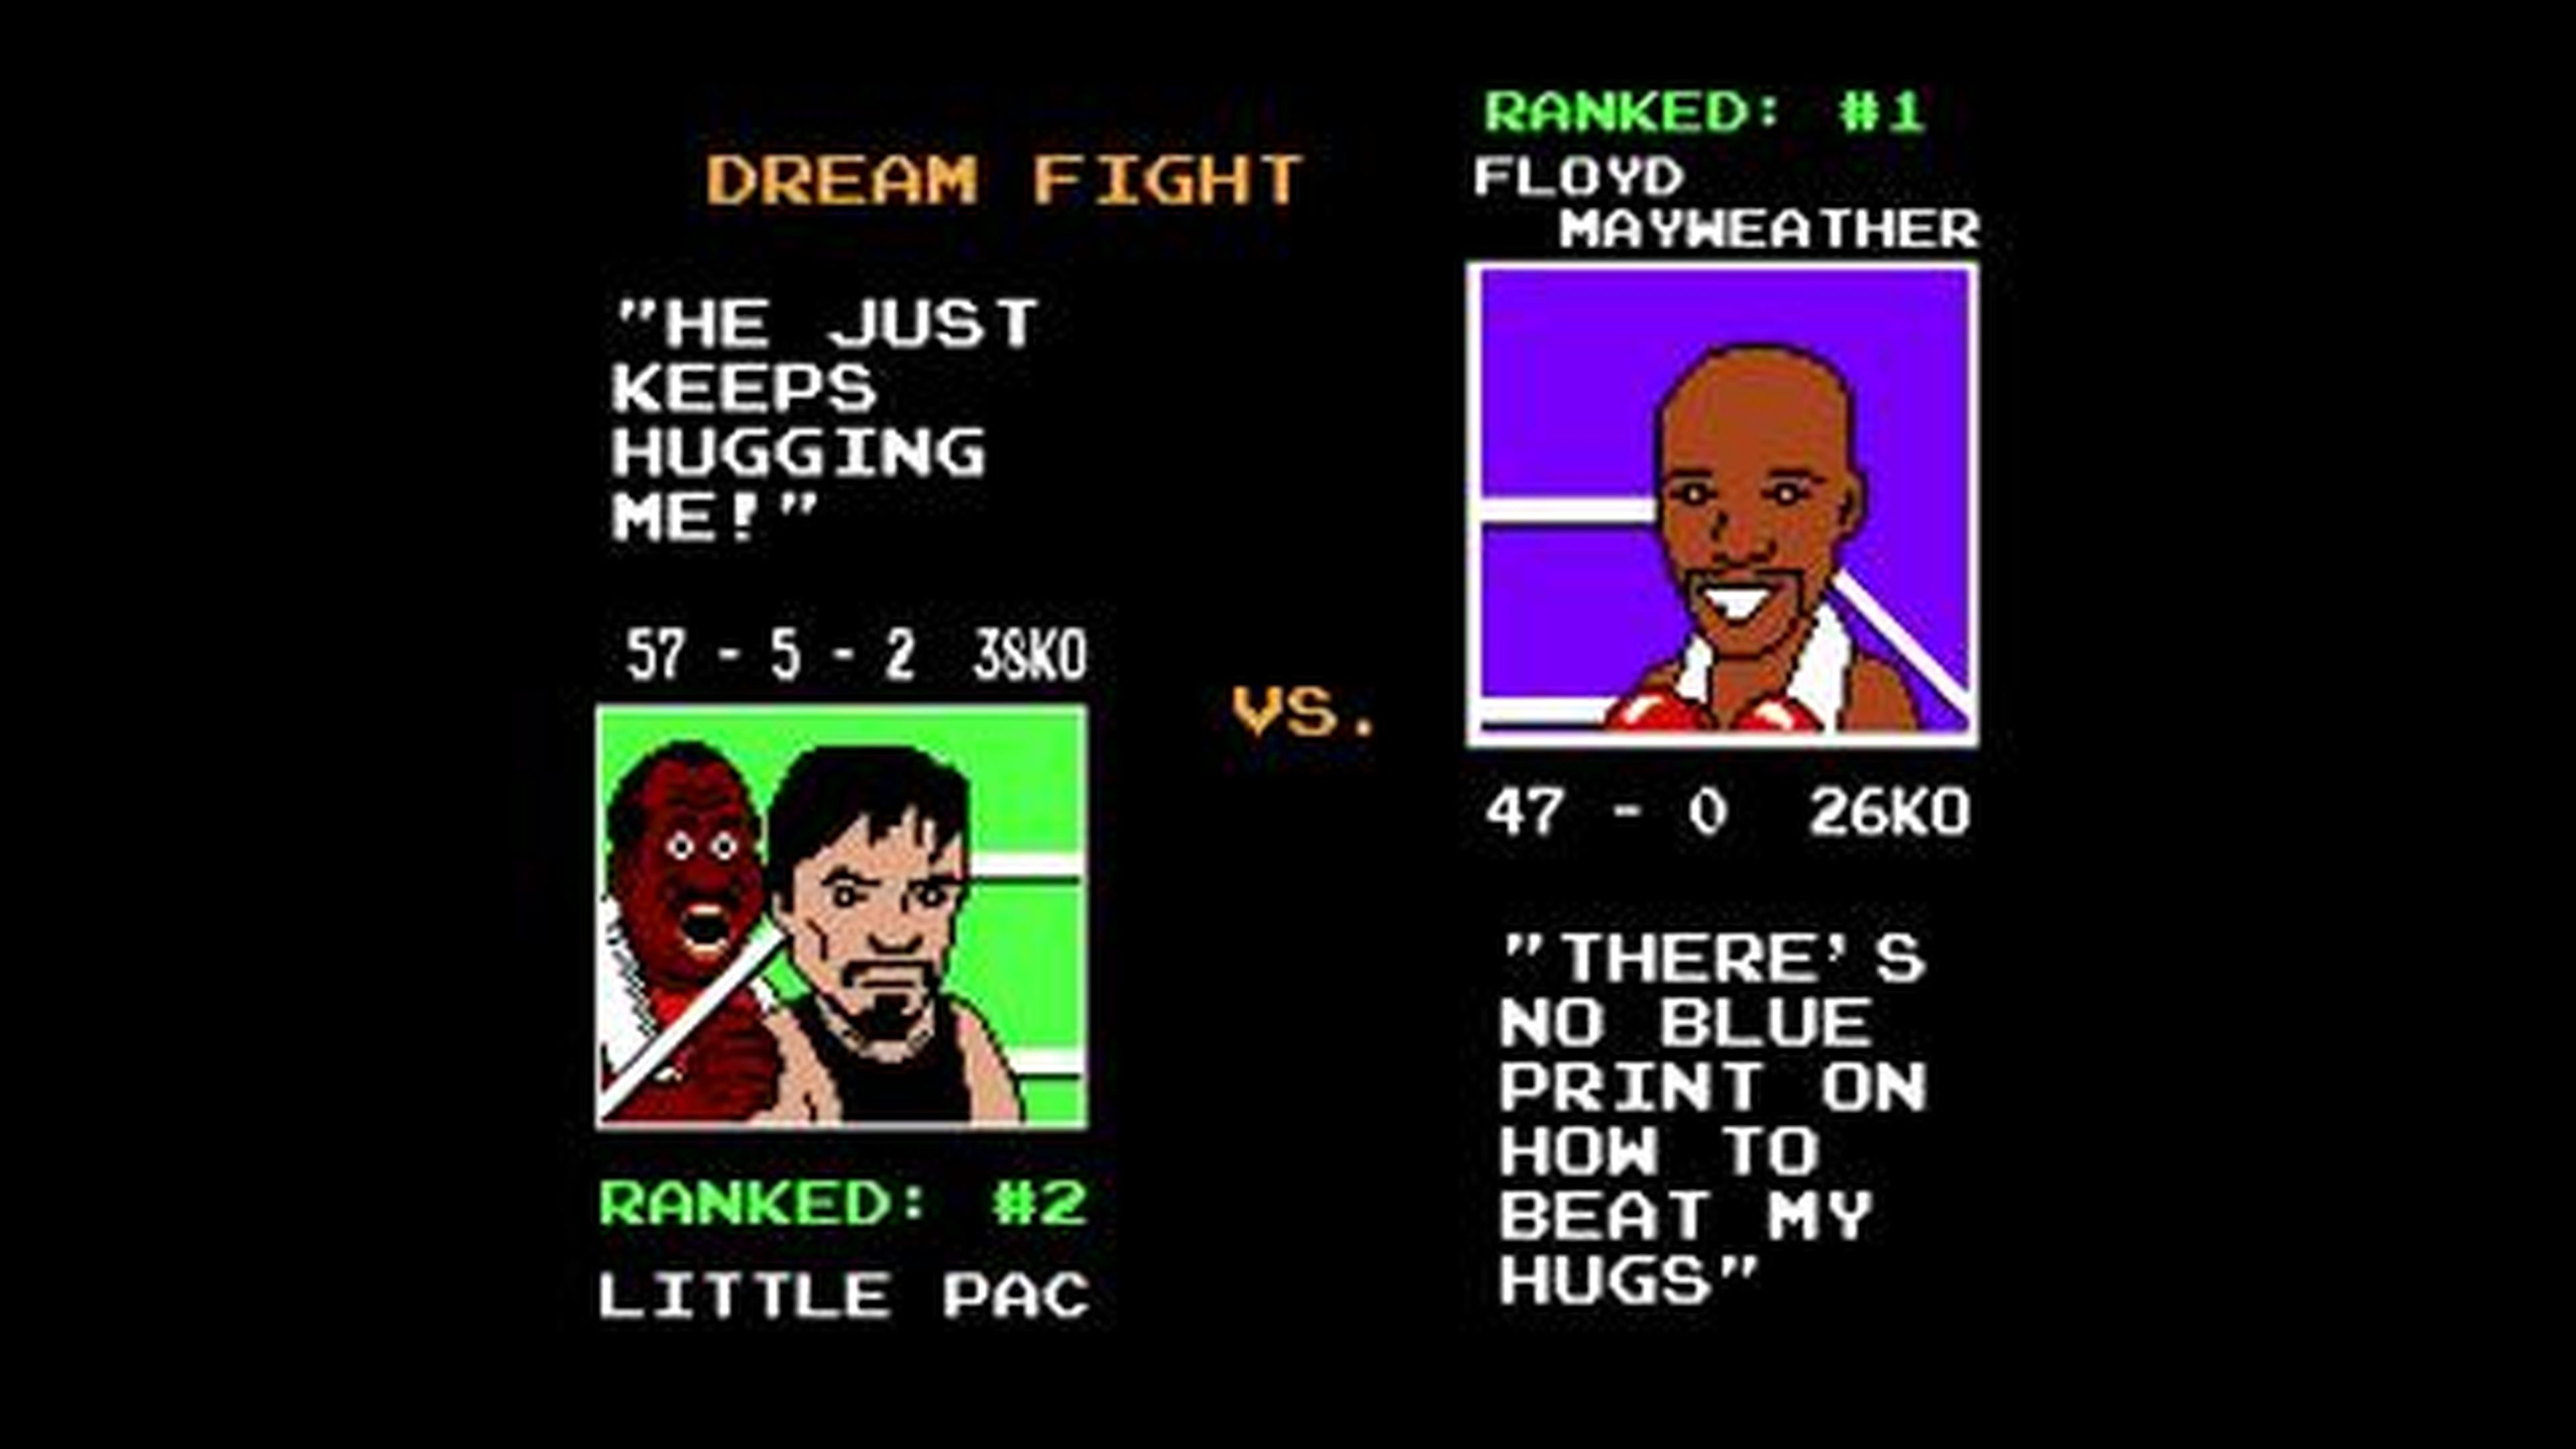 FLOYD MAYWEATHER PUNCH-OUT!!!